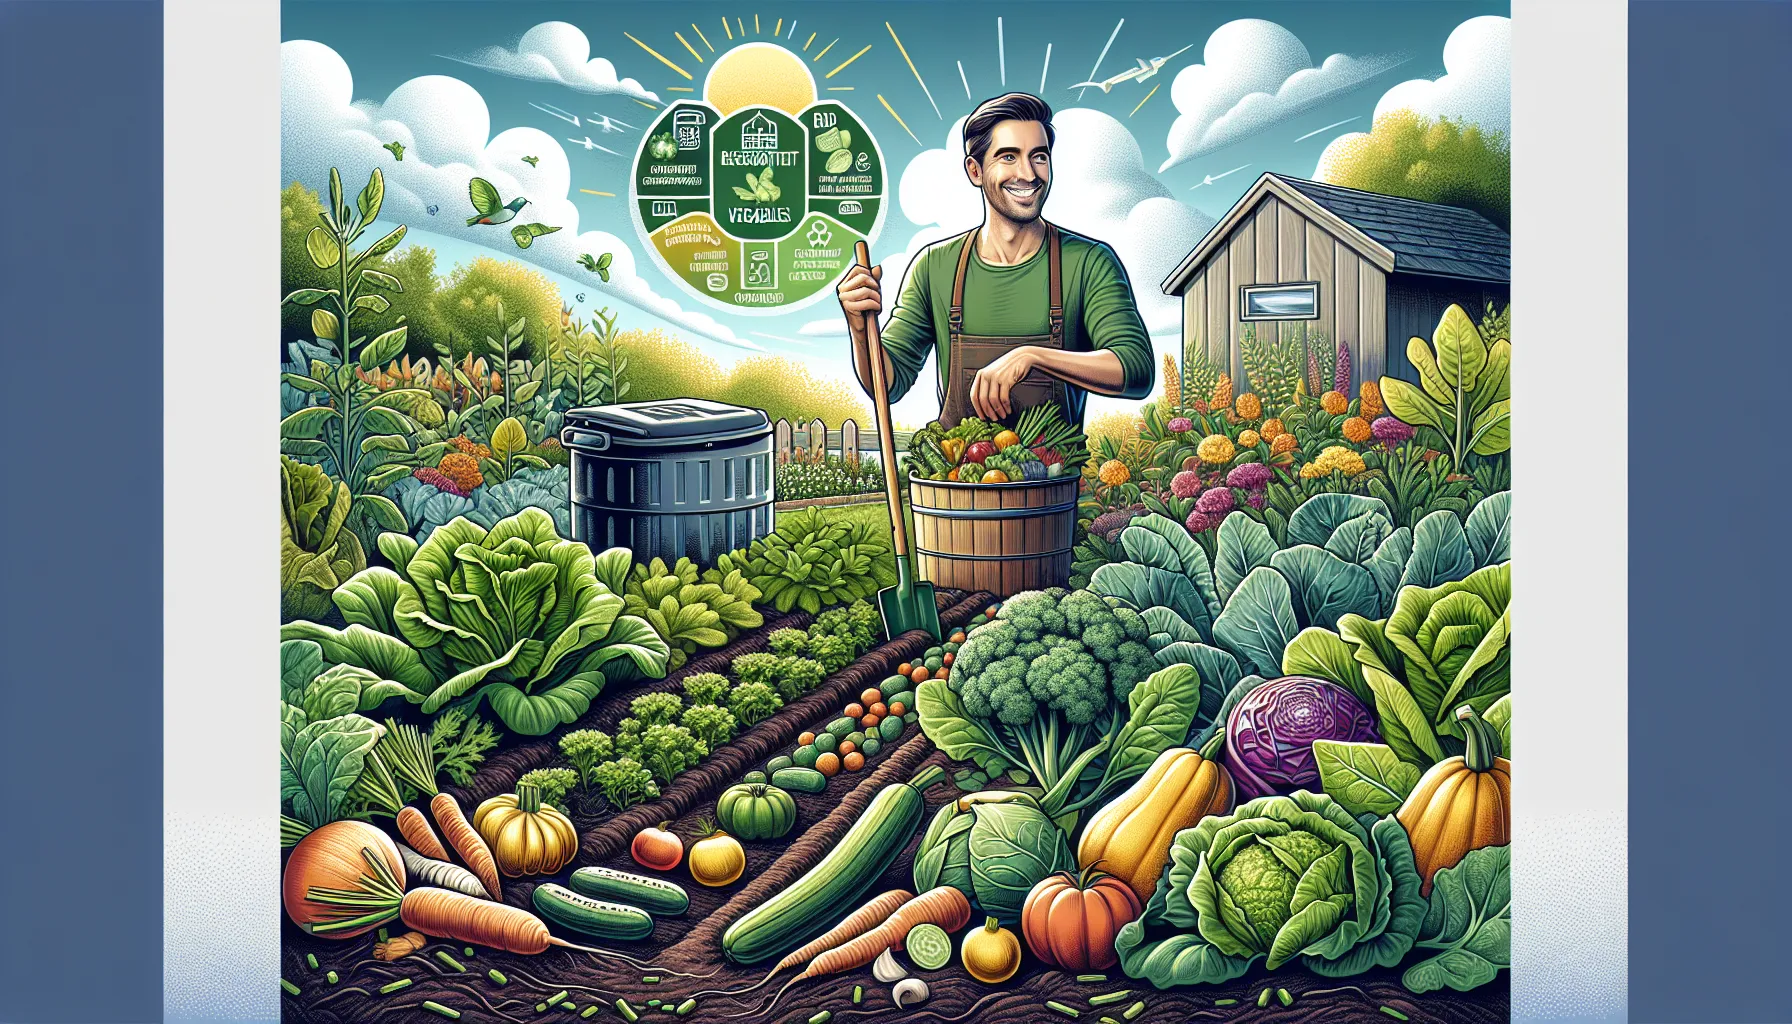 A smiling person holds a basket of freshly harvested vegetables, standing in a vibrant garden abundant with various plant vegetables.